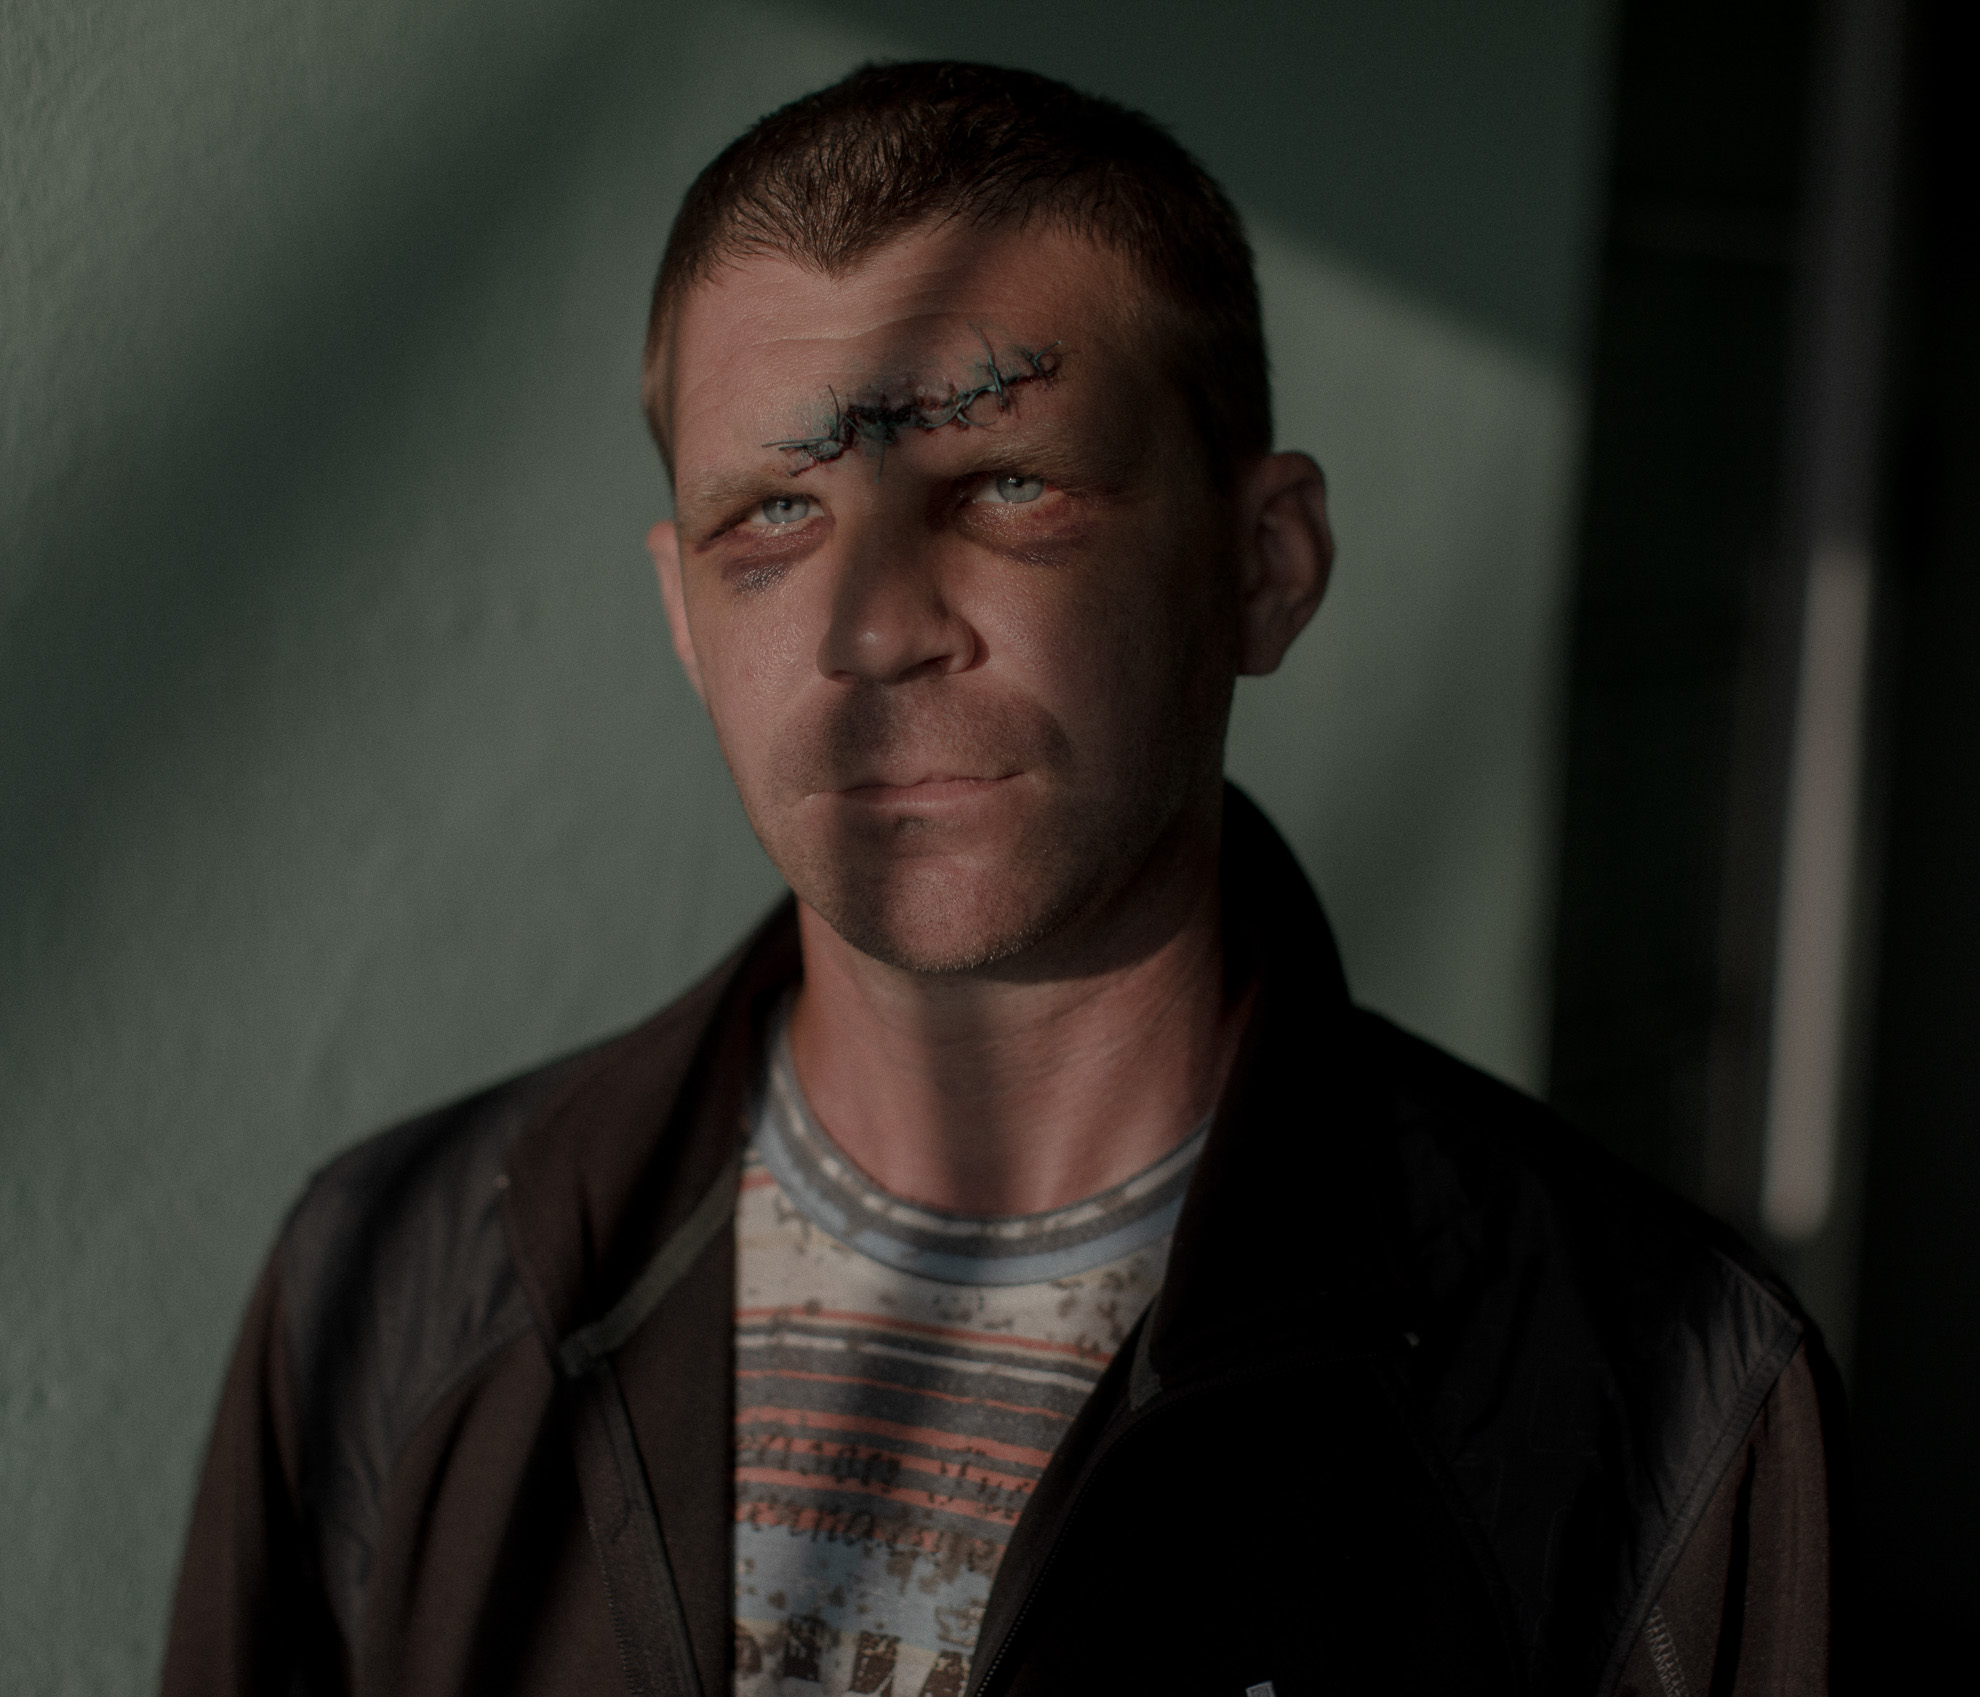 Siergiey - a former soldier who was caught and beaten by the OMON forces as he was on walking to the shop on the second night of the protests (Aug. 10, 2020). In the photo, a man poses for a portrait next to a hospital room in the 2nd Department of Surgical Diseases in Minsk, Belarus.